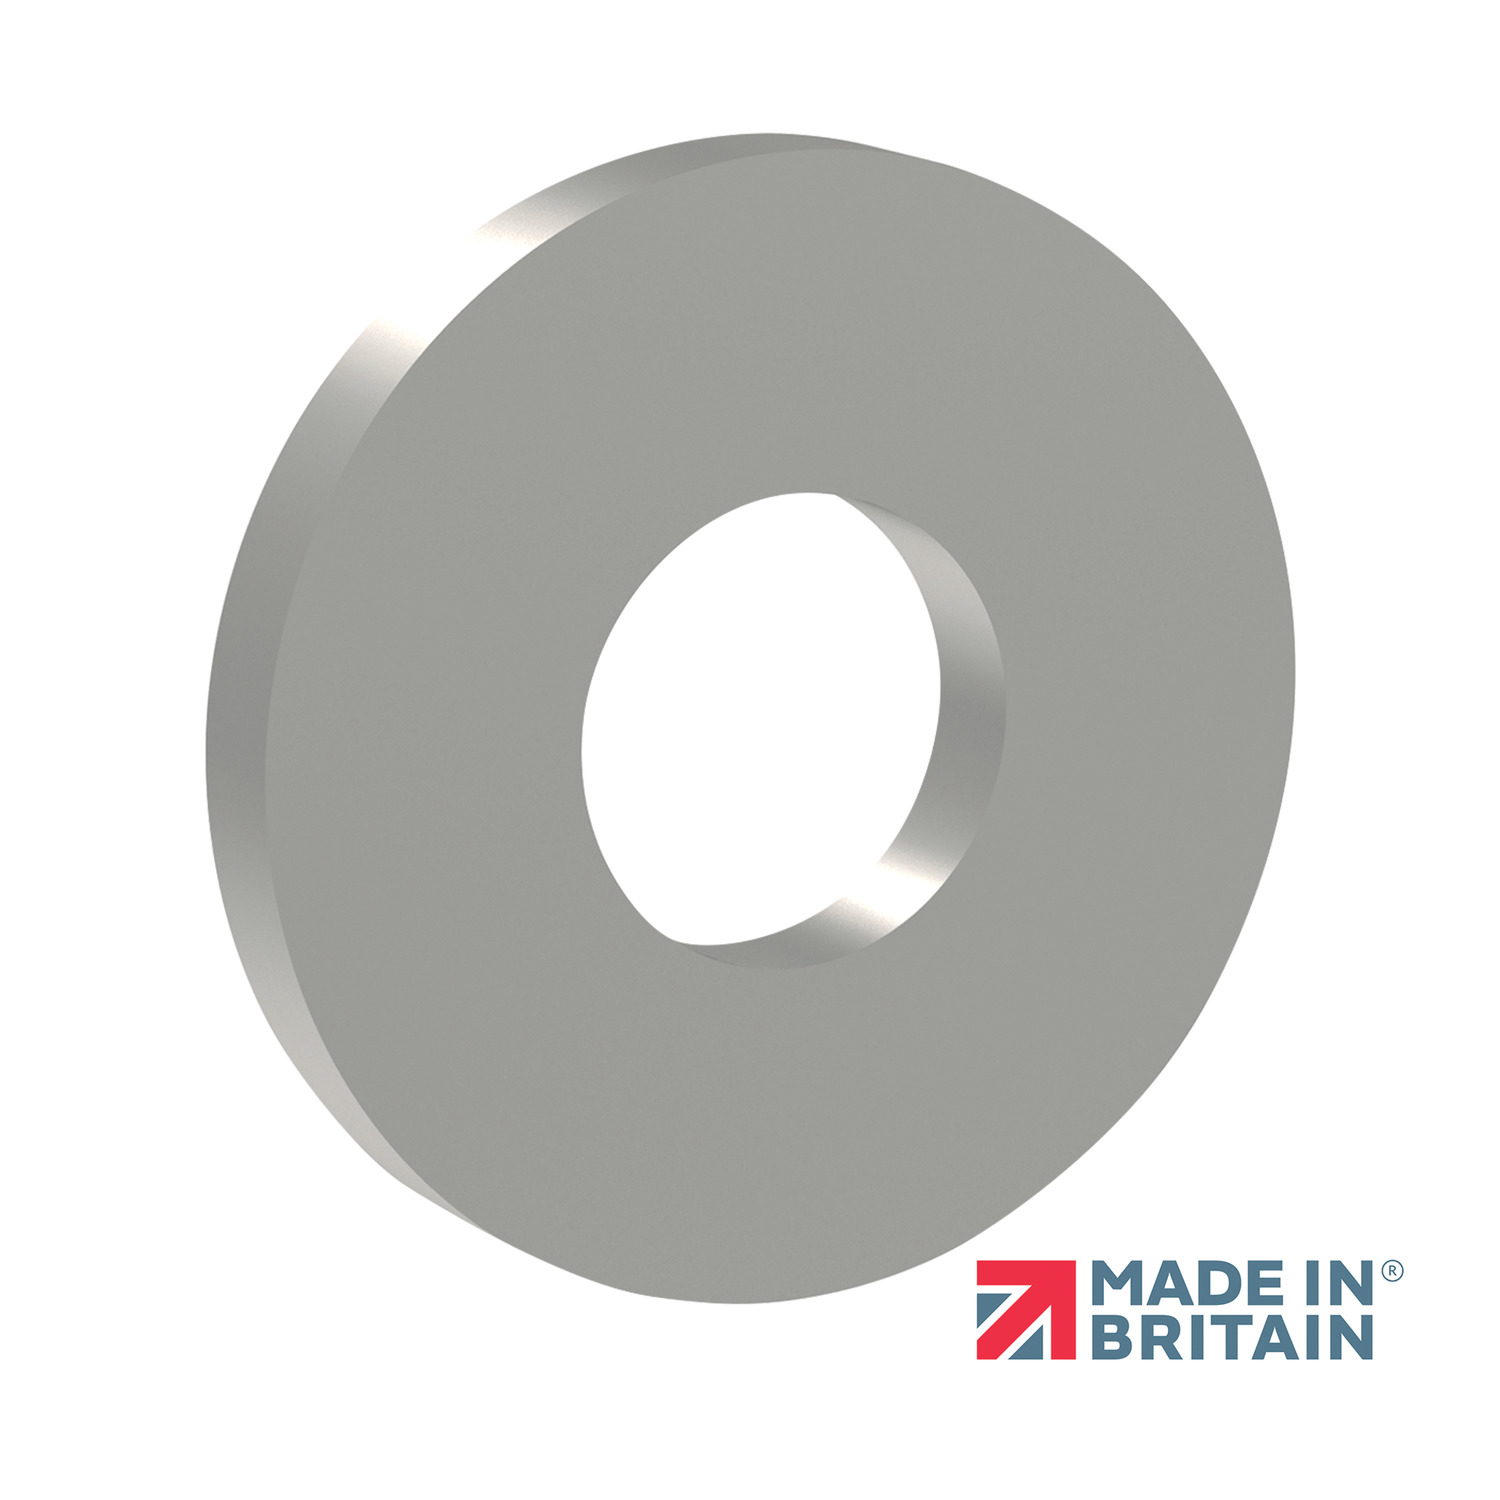 Threaded Captive Washers Threaded captive washer for captive screw installation on non-threaded panels.